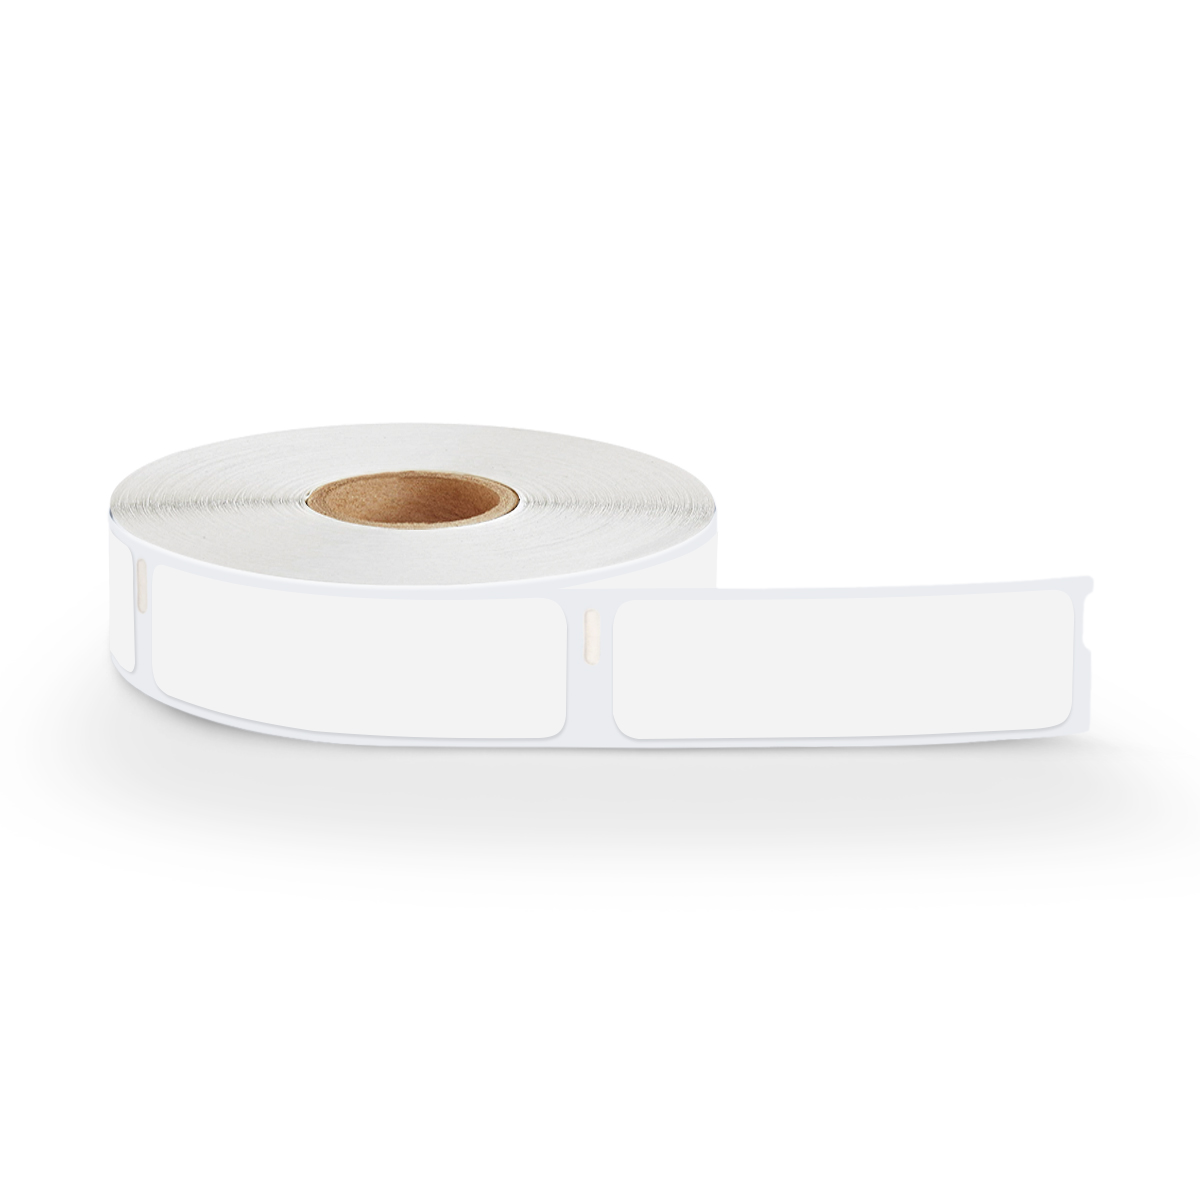  LabelValue.com  Dymo File 1738595 Compatible Barcode Labels,  3/4 x 2-1/2 - 450 Labels per roll, 1 roll per Package : All Purpose Labels  : Office Products